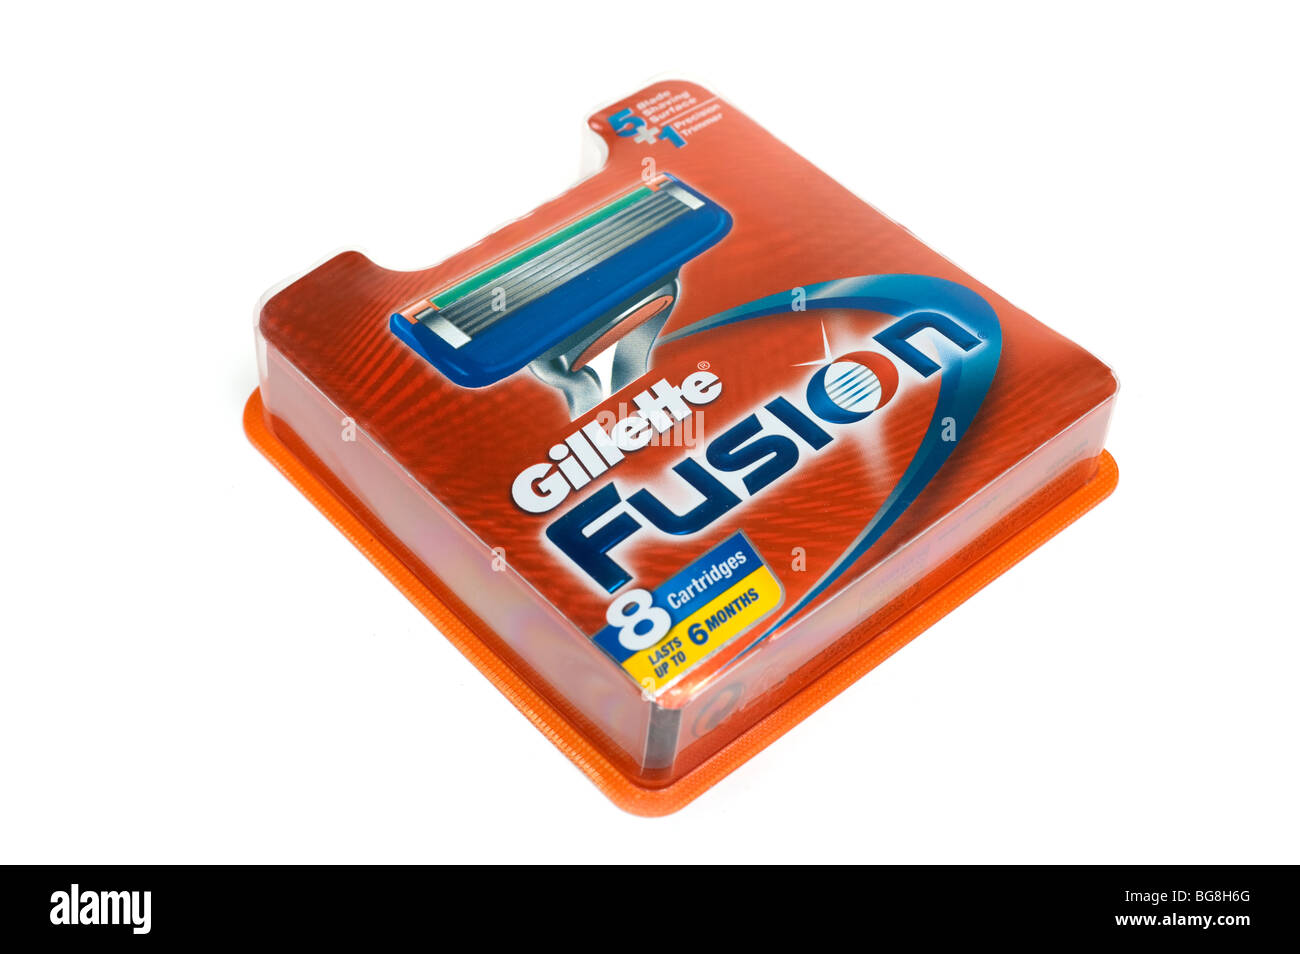 Gillette Fusion eight cartridge five blades razor heads pack Stock Photo